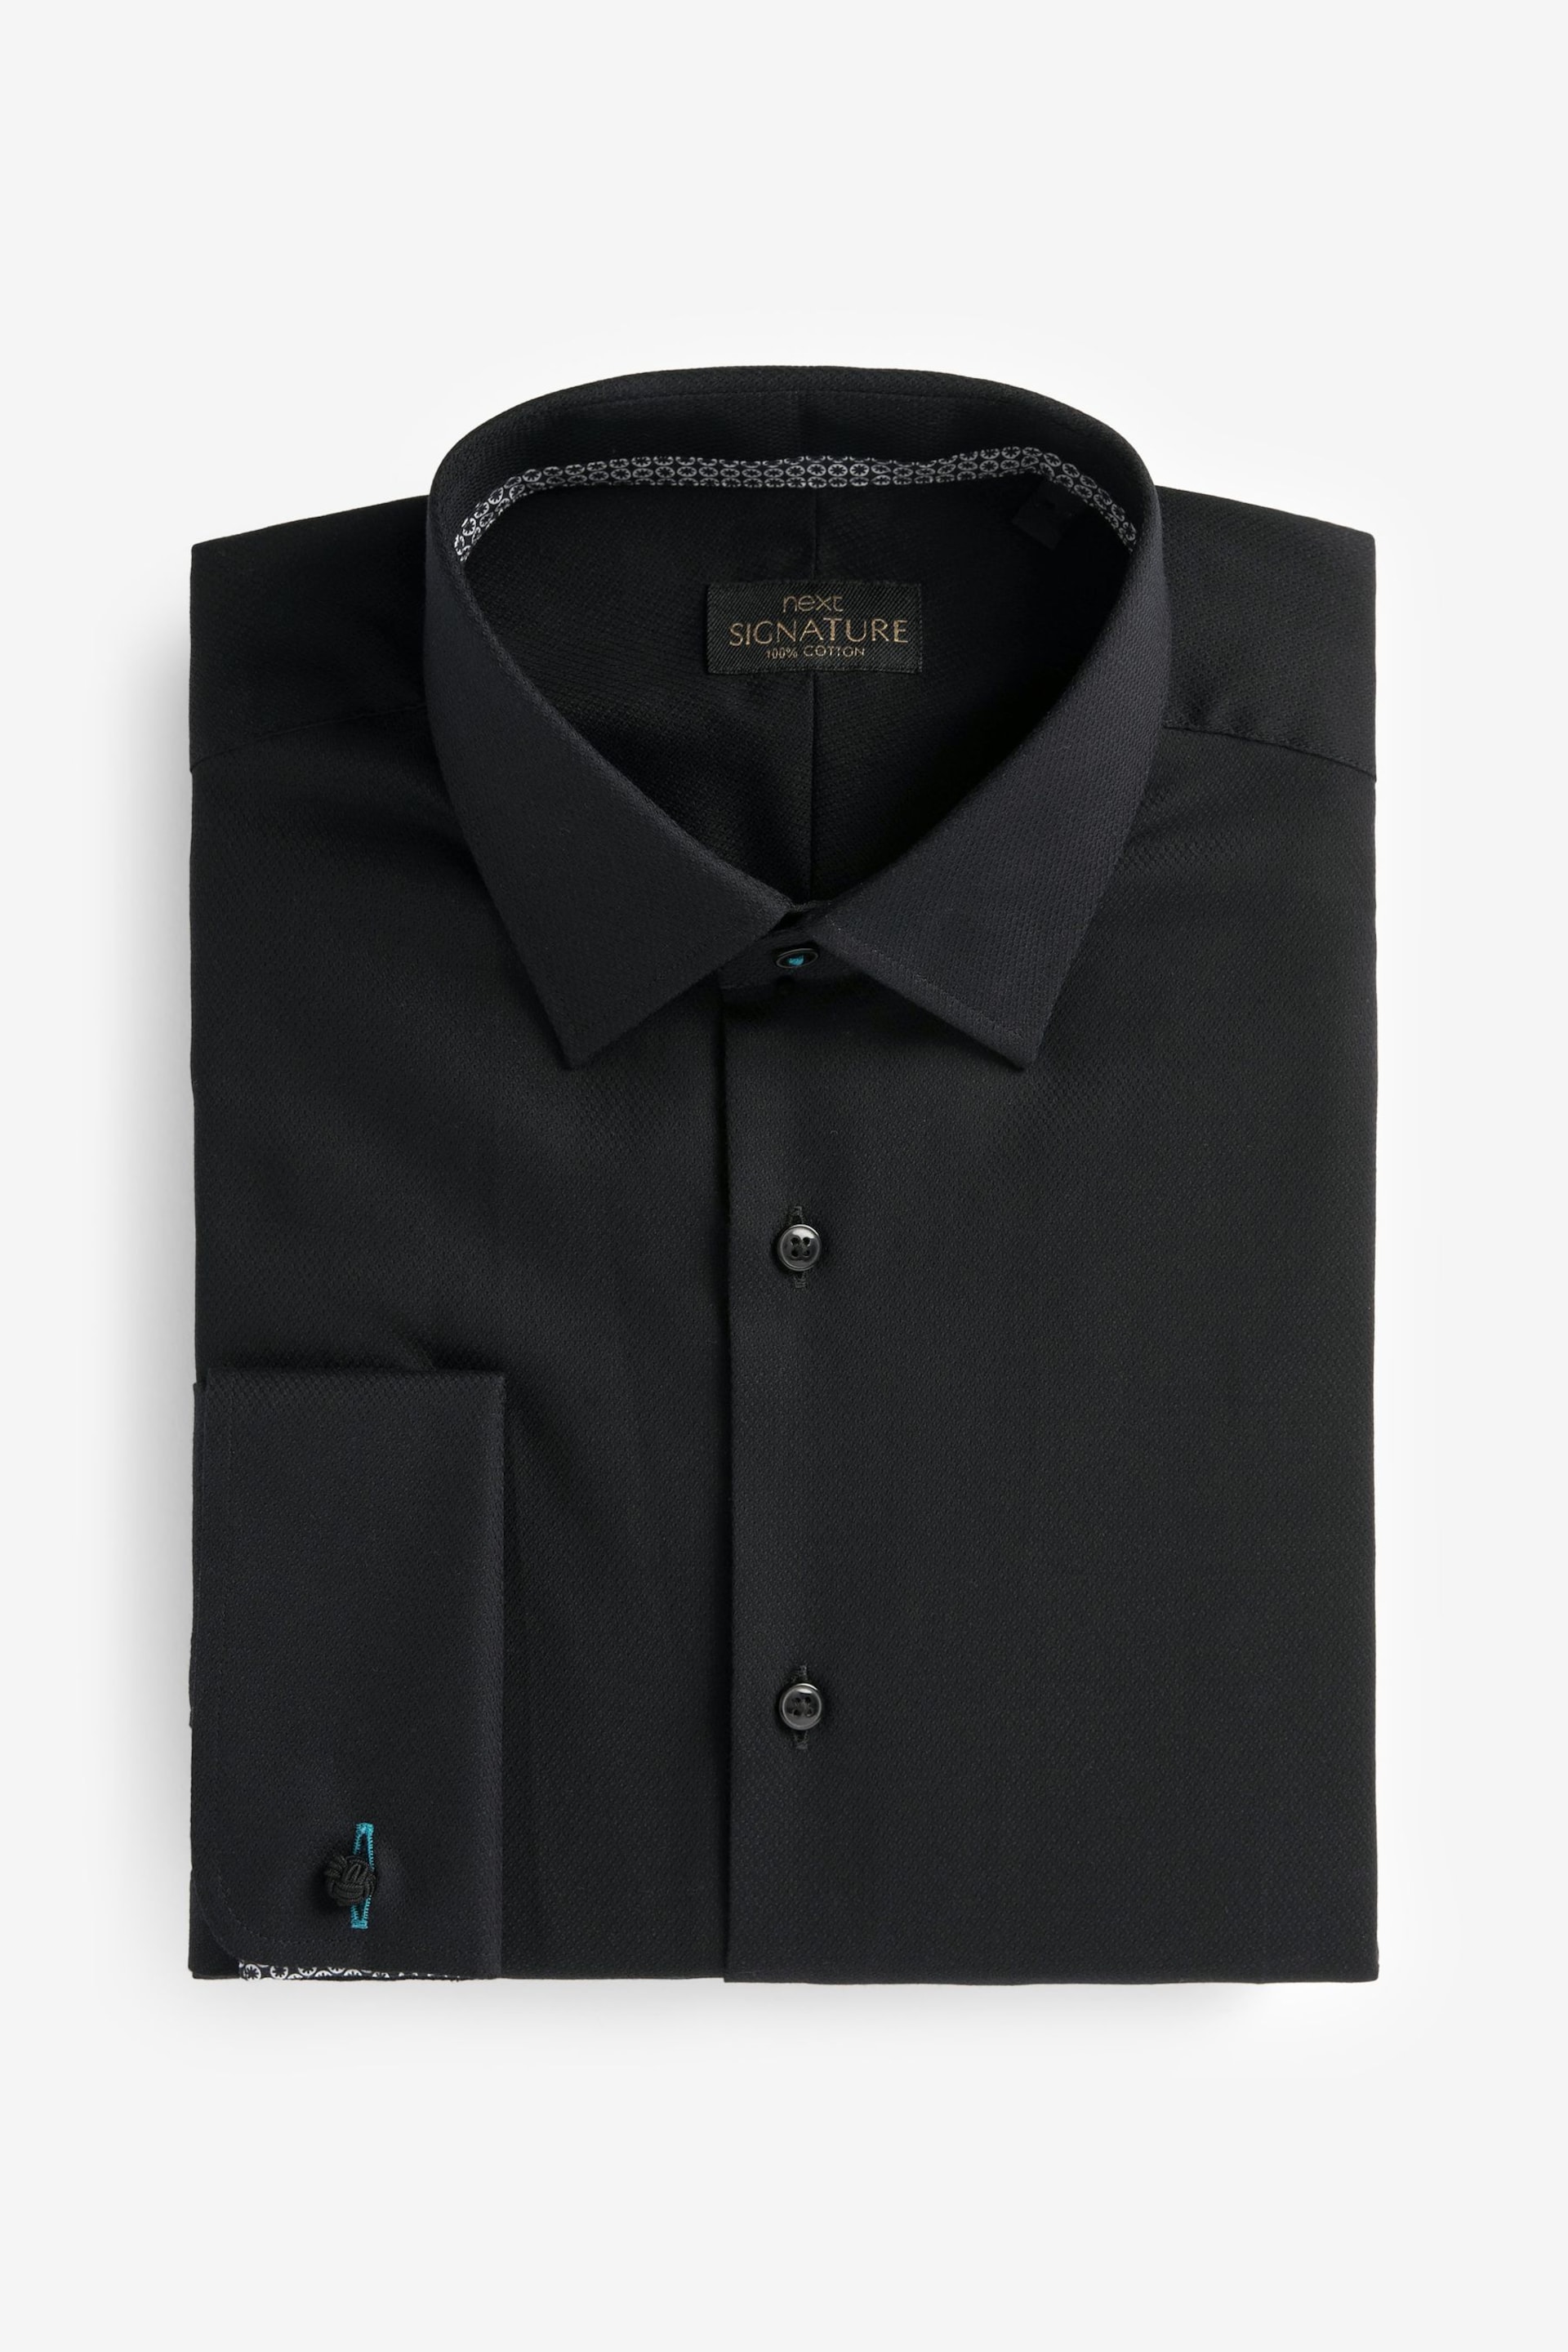 Black Slim Fit Signature Textured Single Cuff Shirt With Trim Detail - Image 6 of 8